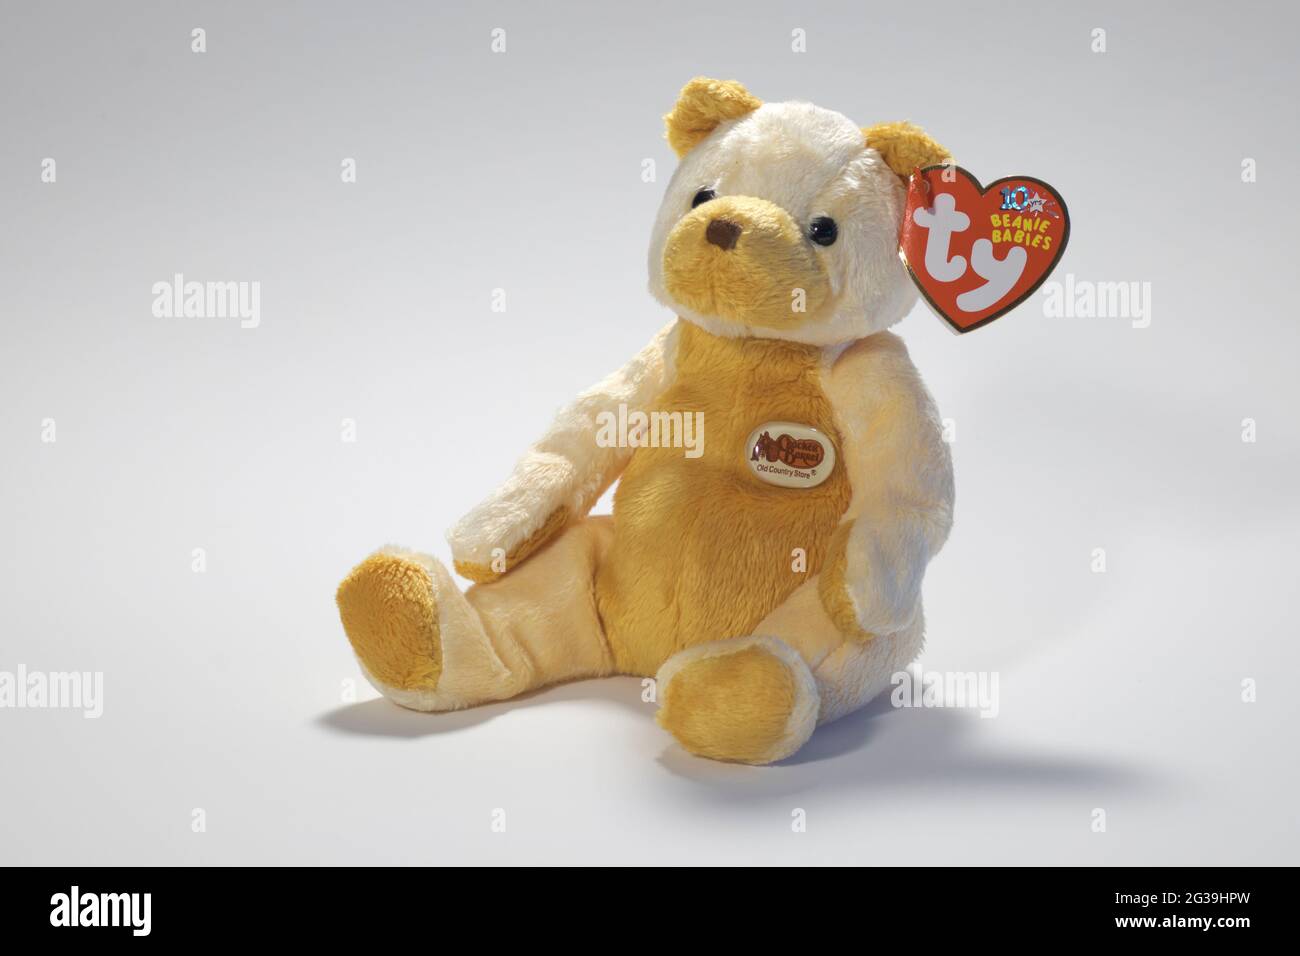 Photo of Beanie Baby named Cornbread, designed exclusively for Cracker Barrel Old Country Store. Date of birth July 3, 2003. Stock Photo